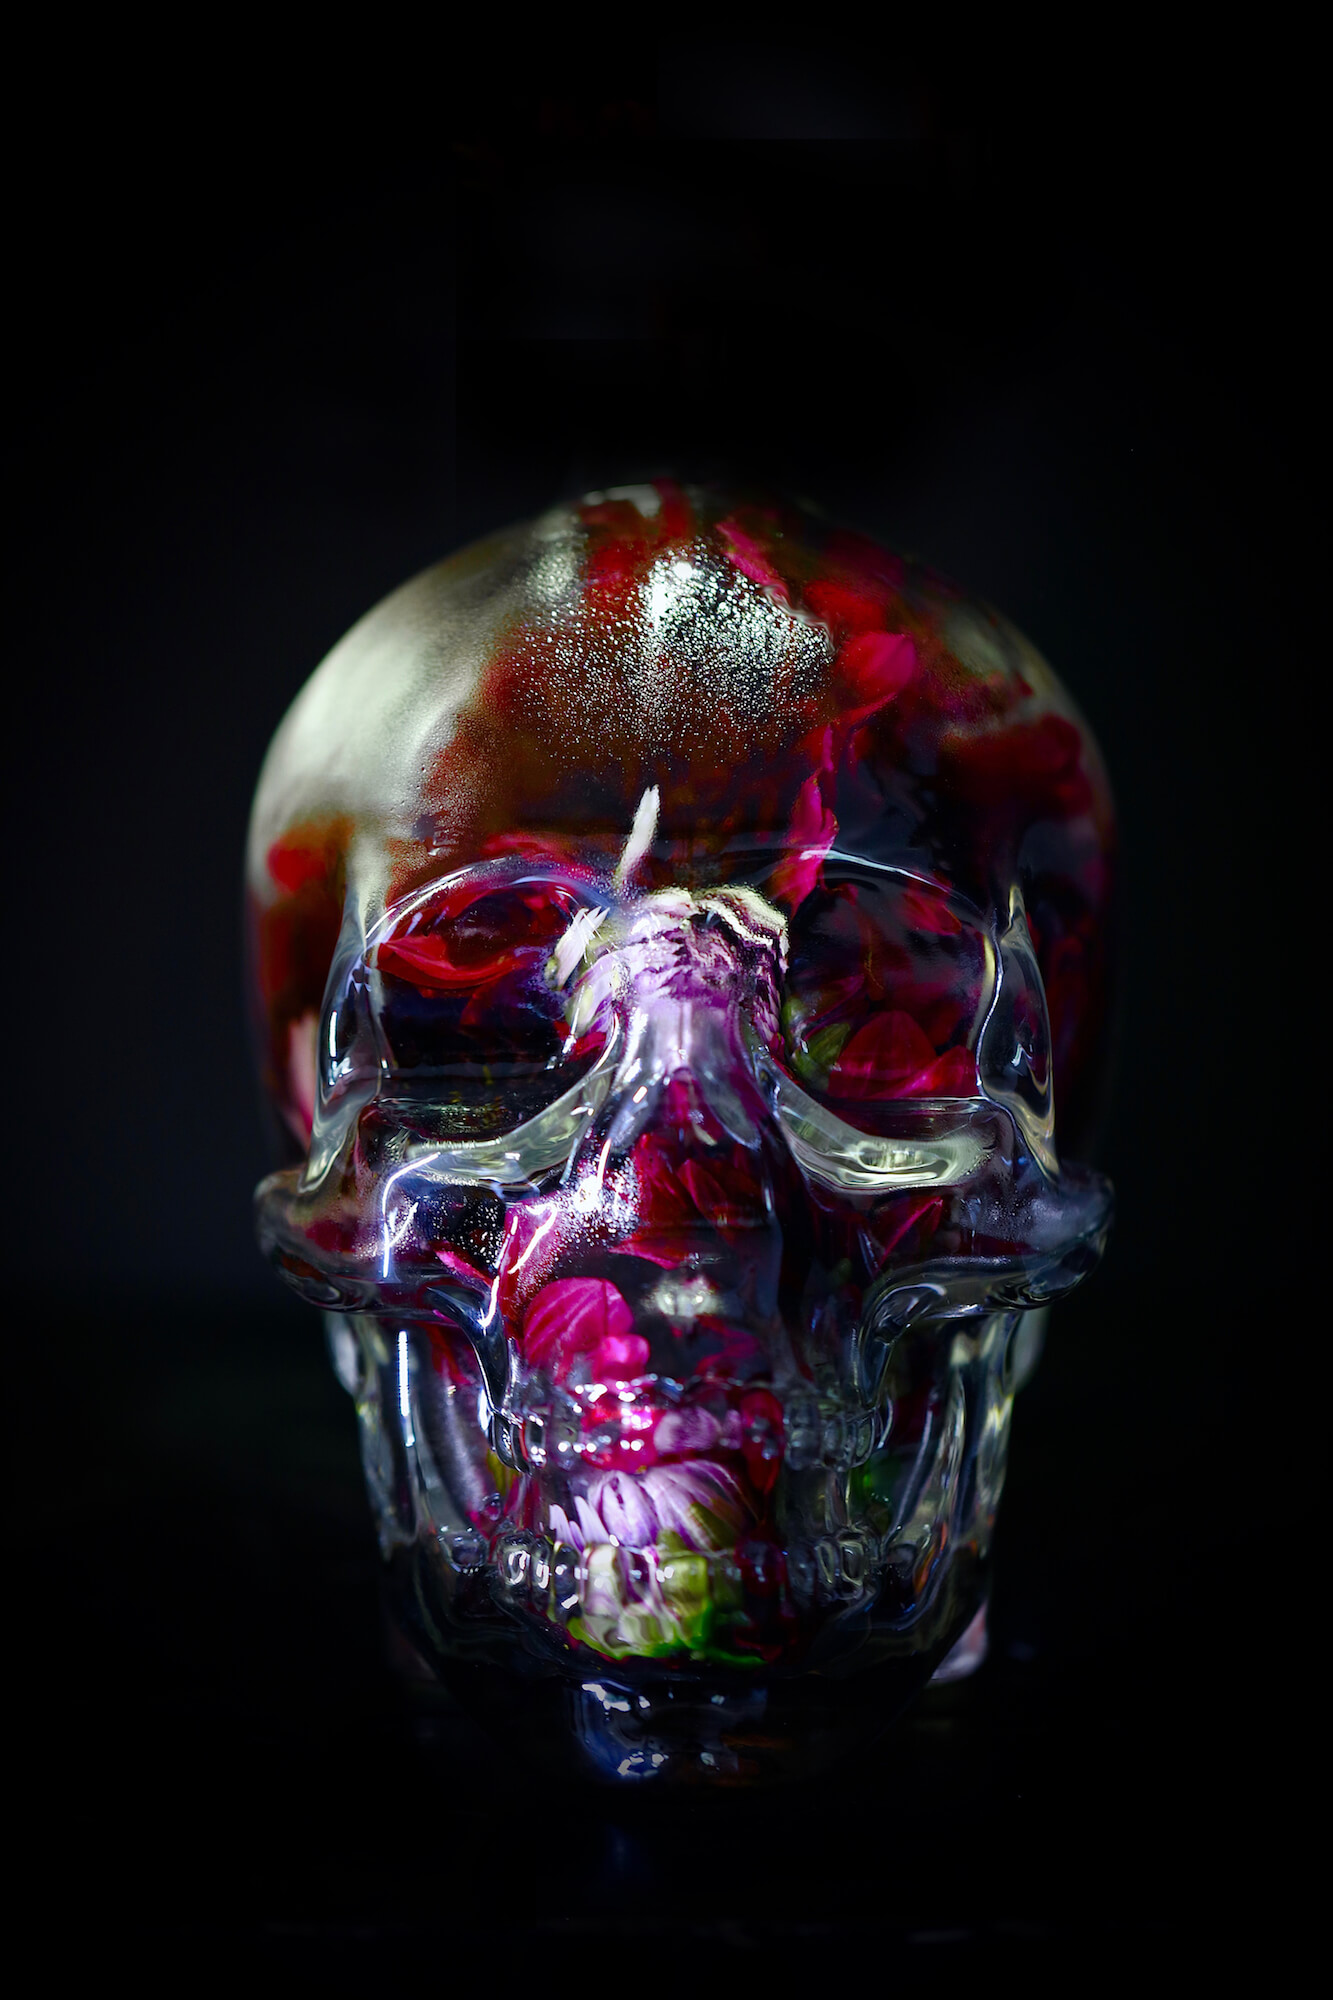 a glass skull full of flowers on a black background